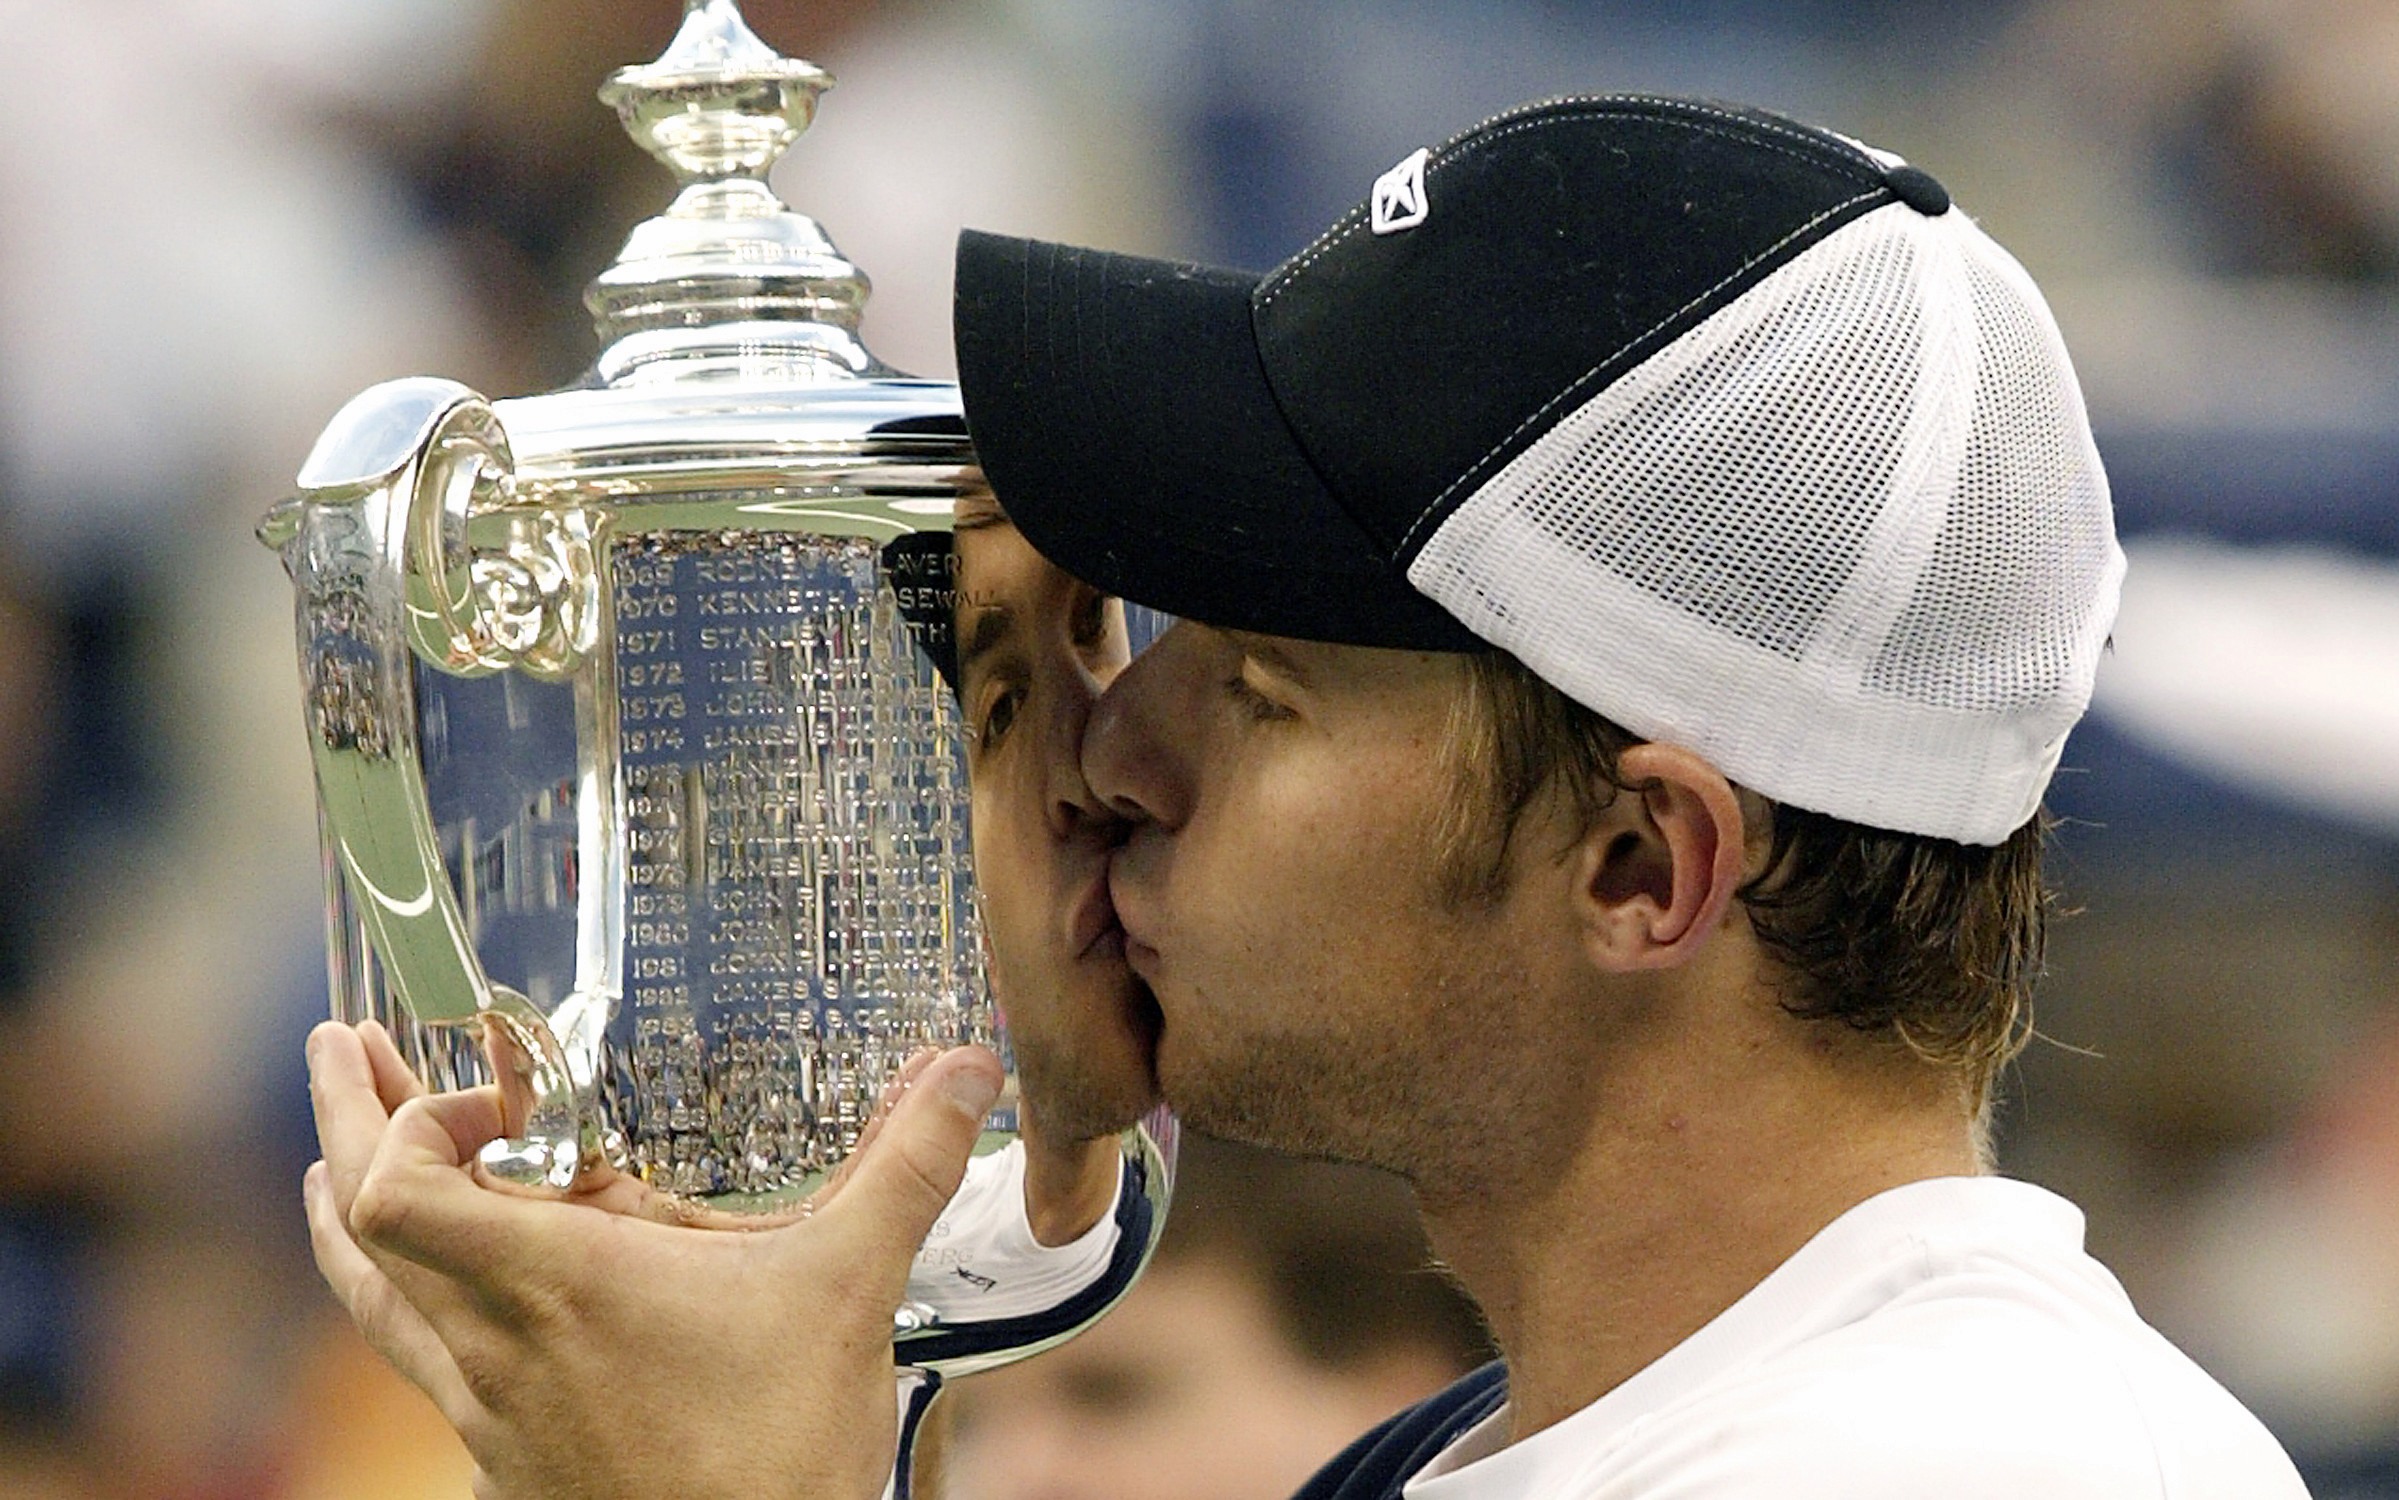 Andy Roddick shares photo of ‘cool US Open tradition that never gets talked about’